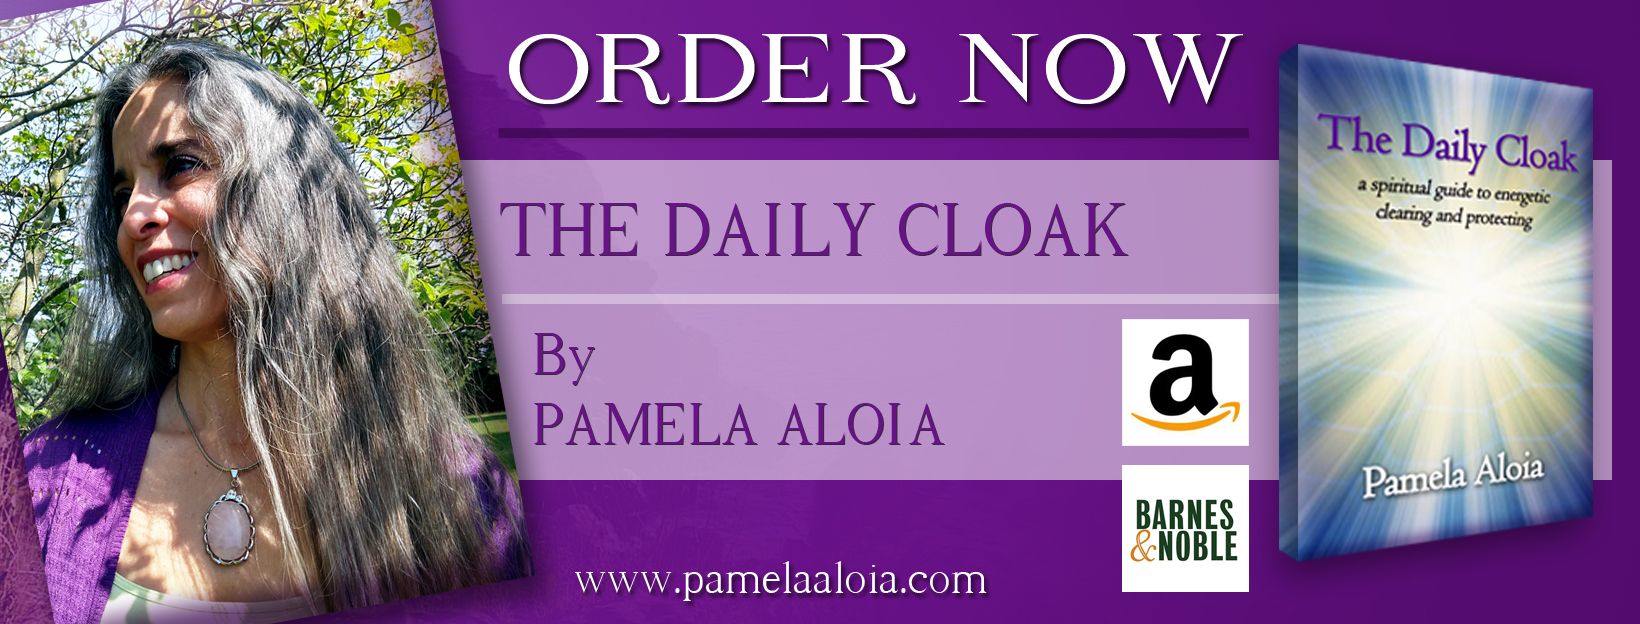 Daily Cloak Order Now Banner copy02